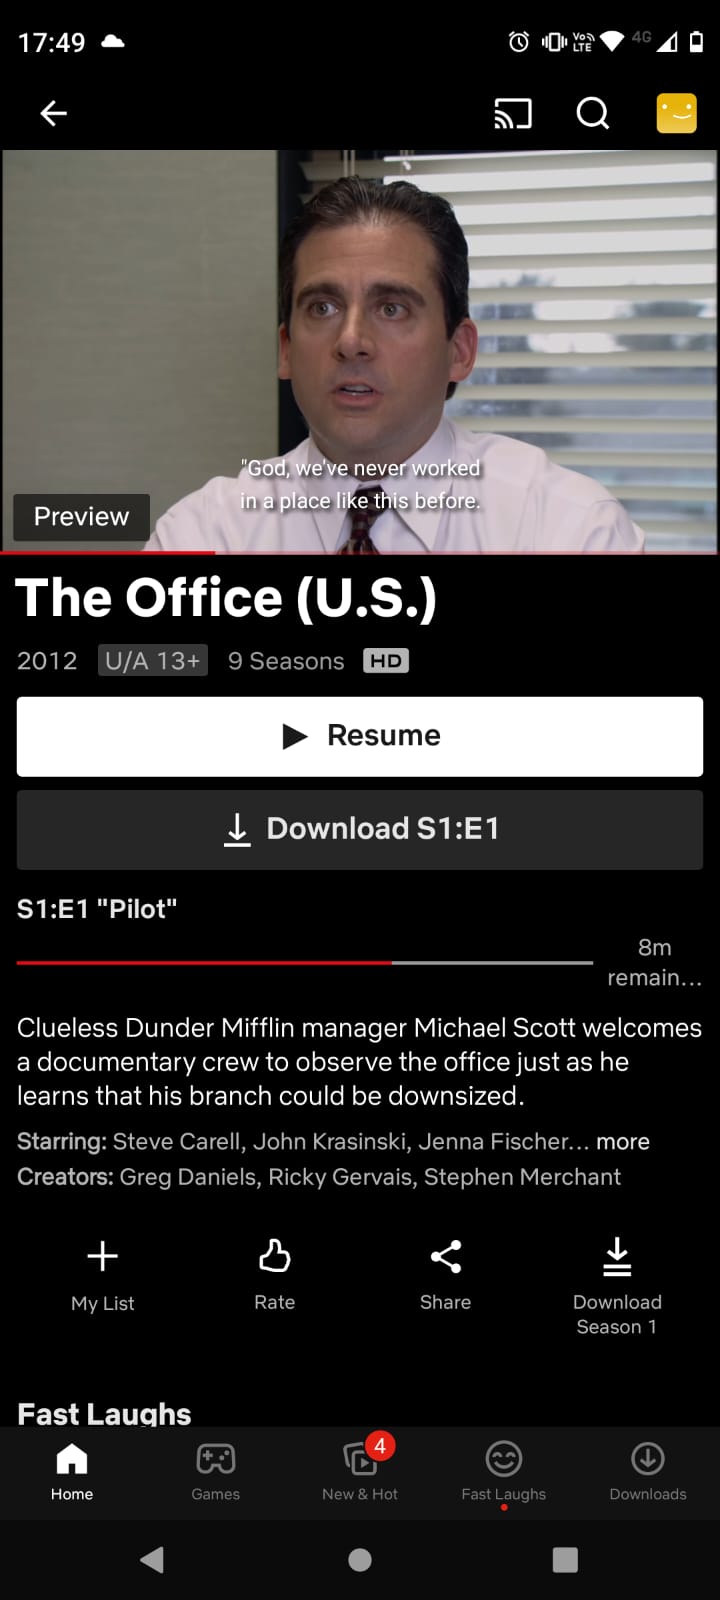 Netflix’s mobile app displays certain titles in bold or larger text sizes to draw attention